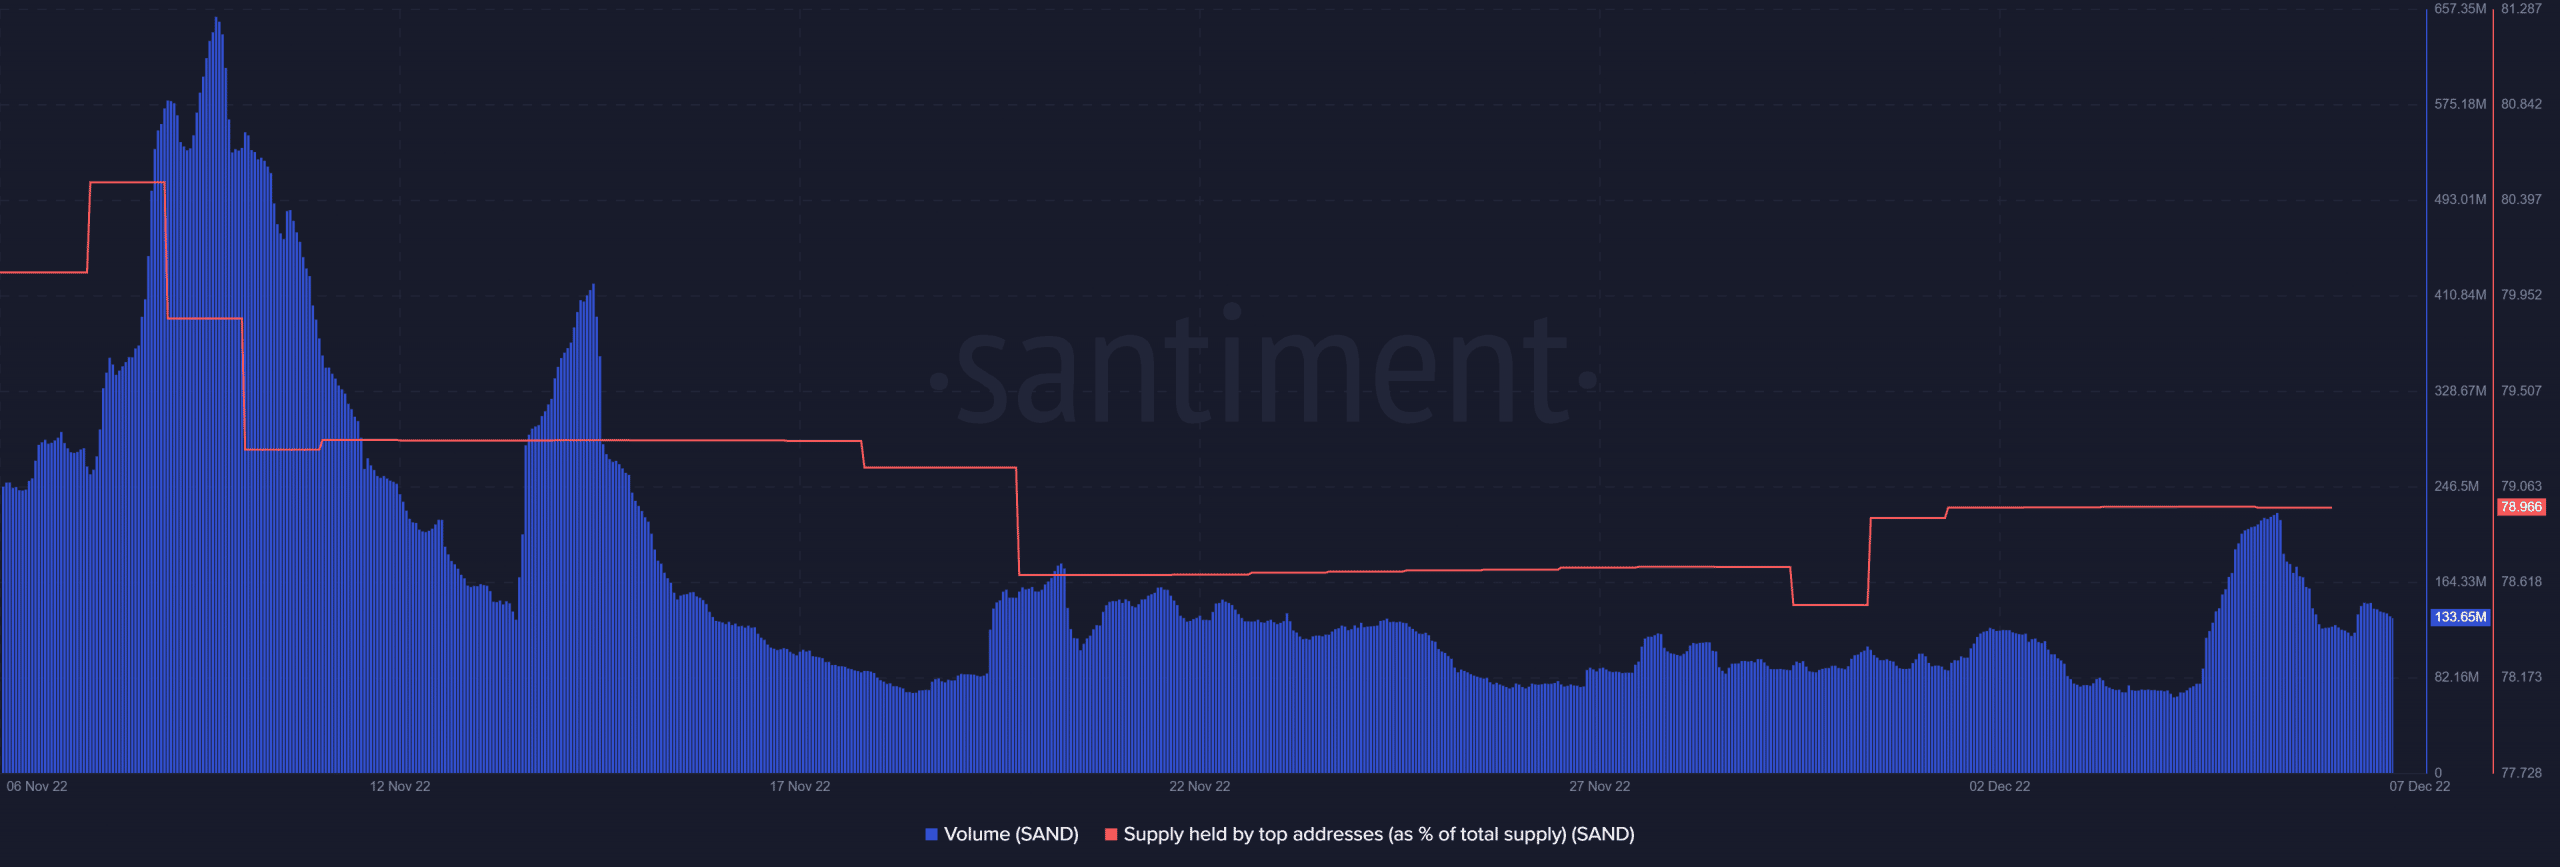 SAND volume and supply held by top 1% addresses